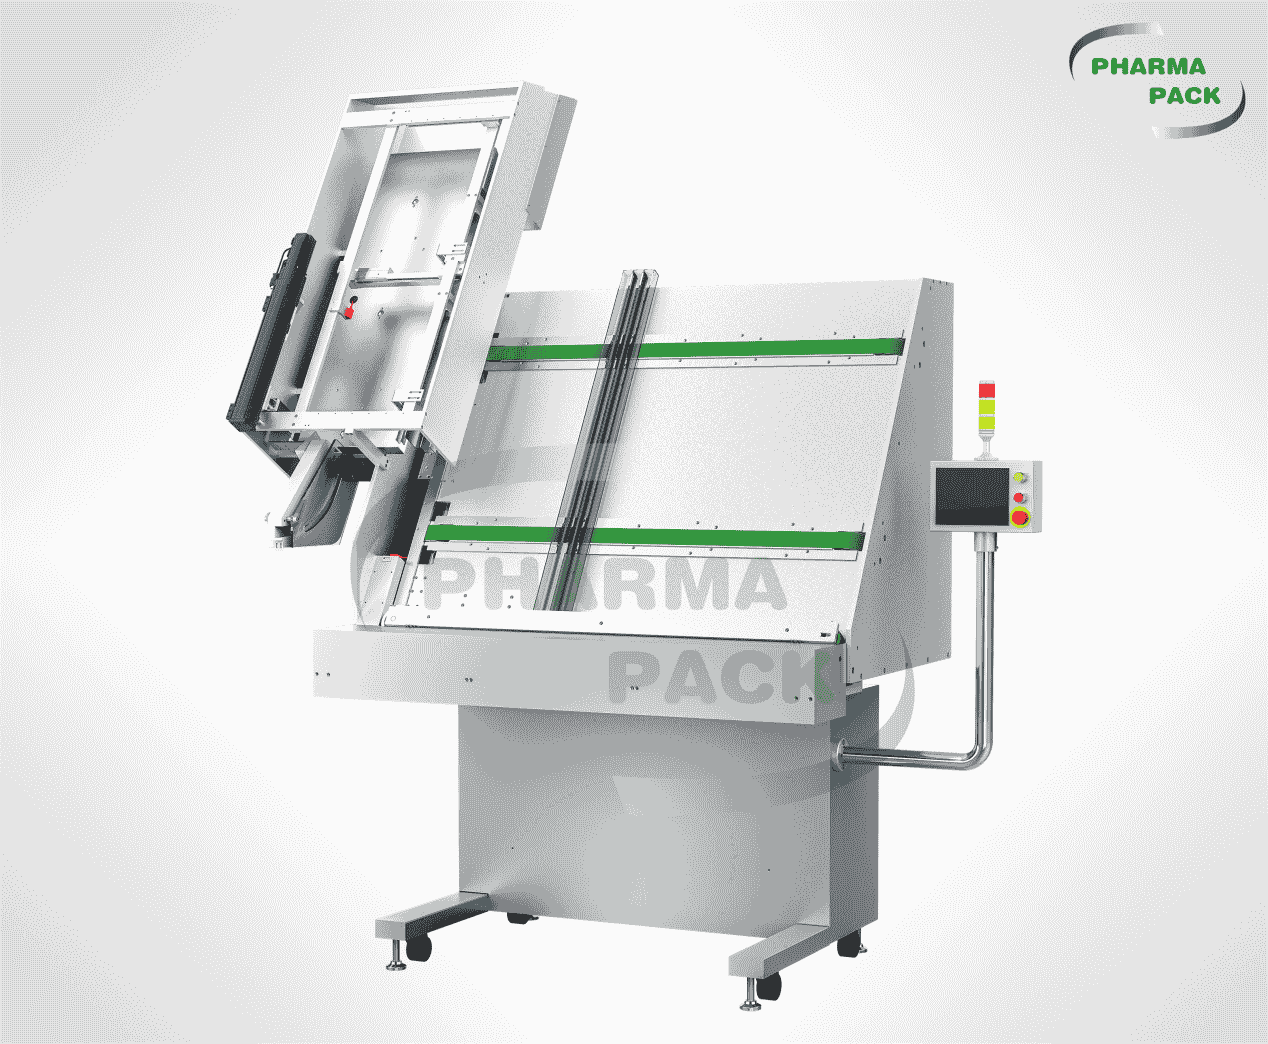 LFOS-20 Manual attachment machine: Automated packaging solutions to help the development of the pharmaceutical industry